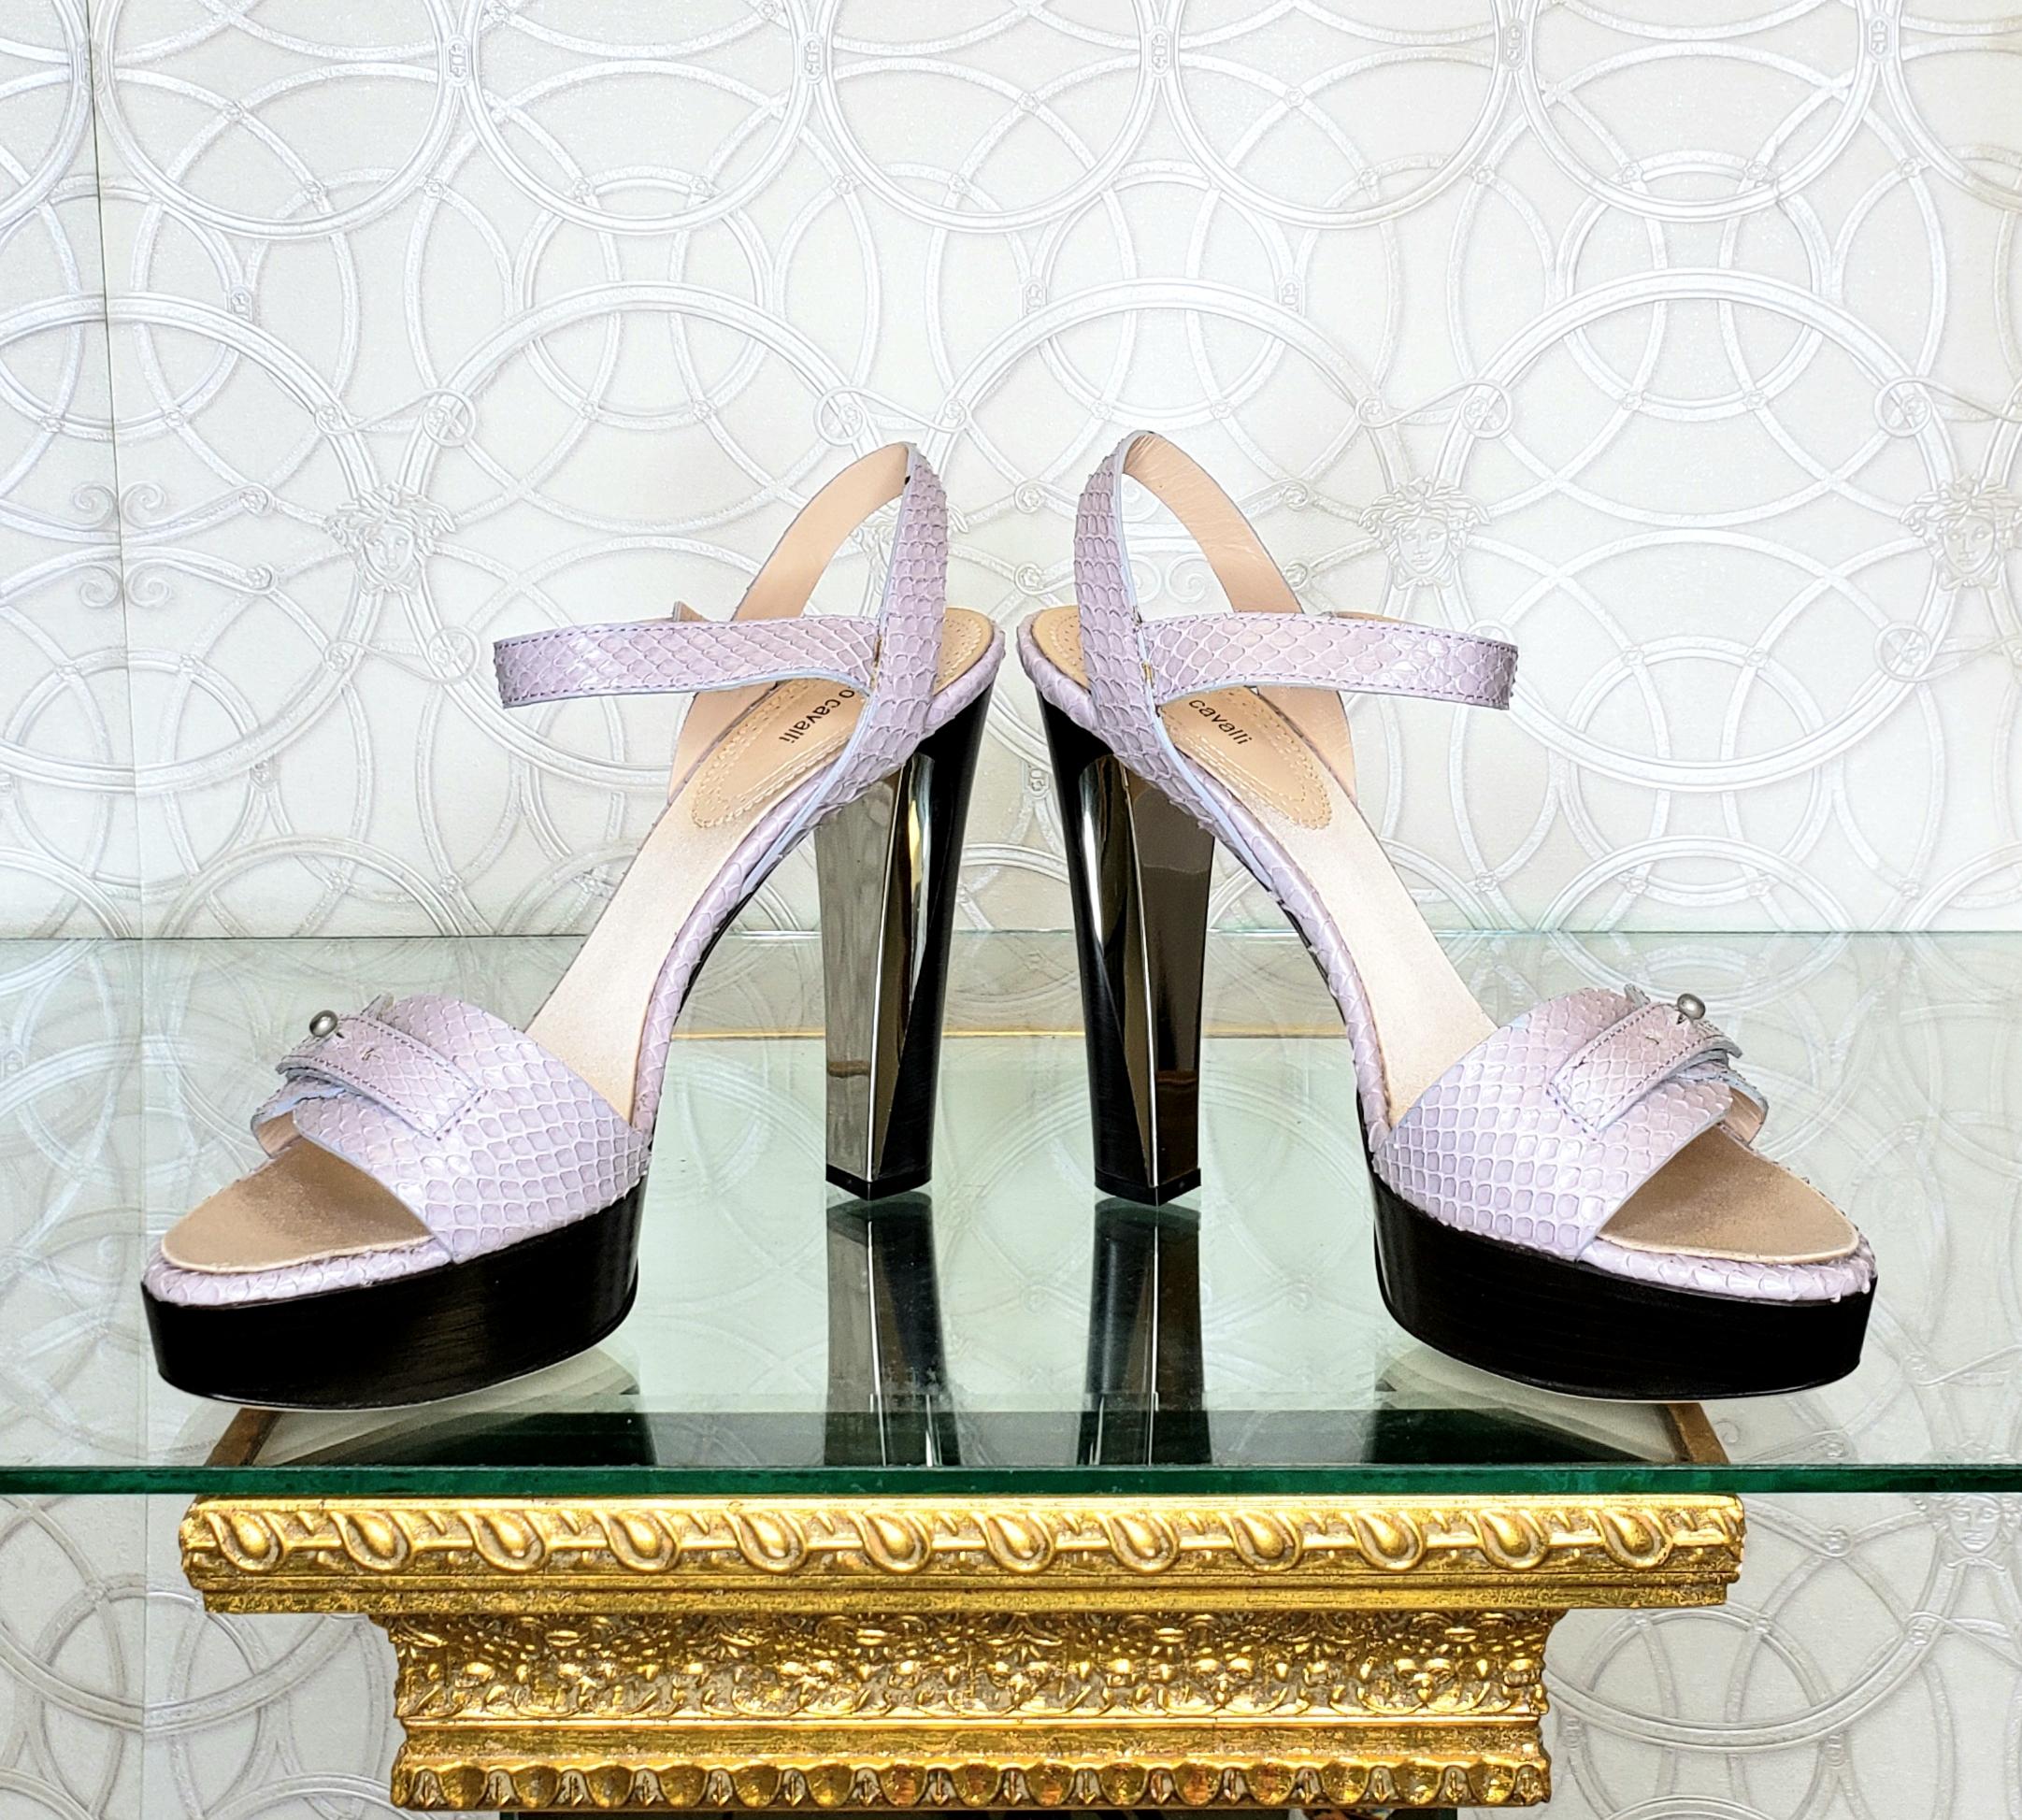 ROBERTO CAVALLI SHOES
Celebrate glamorous times with ROBERTO CAVALLI's chic, high-heeled platforms.
 
Color: Lavender
Material: Genuine snakeskin
 Heel measures 5 1/2